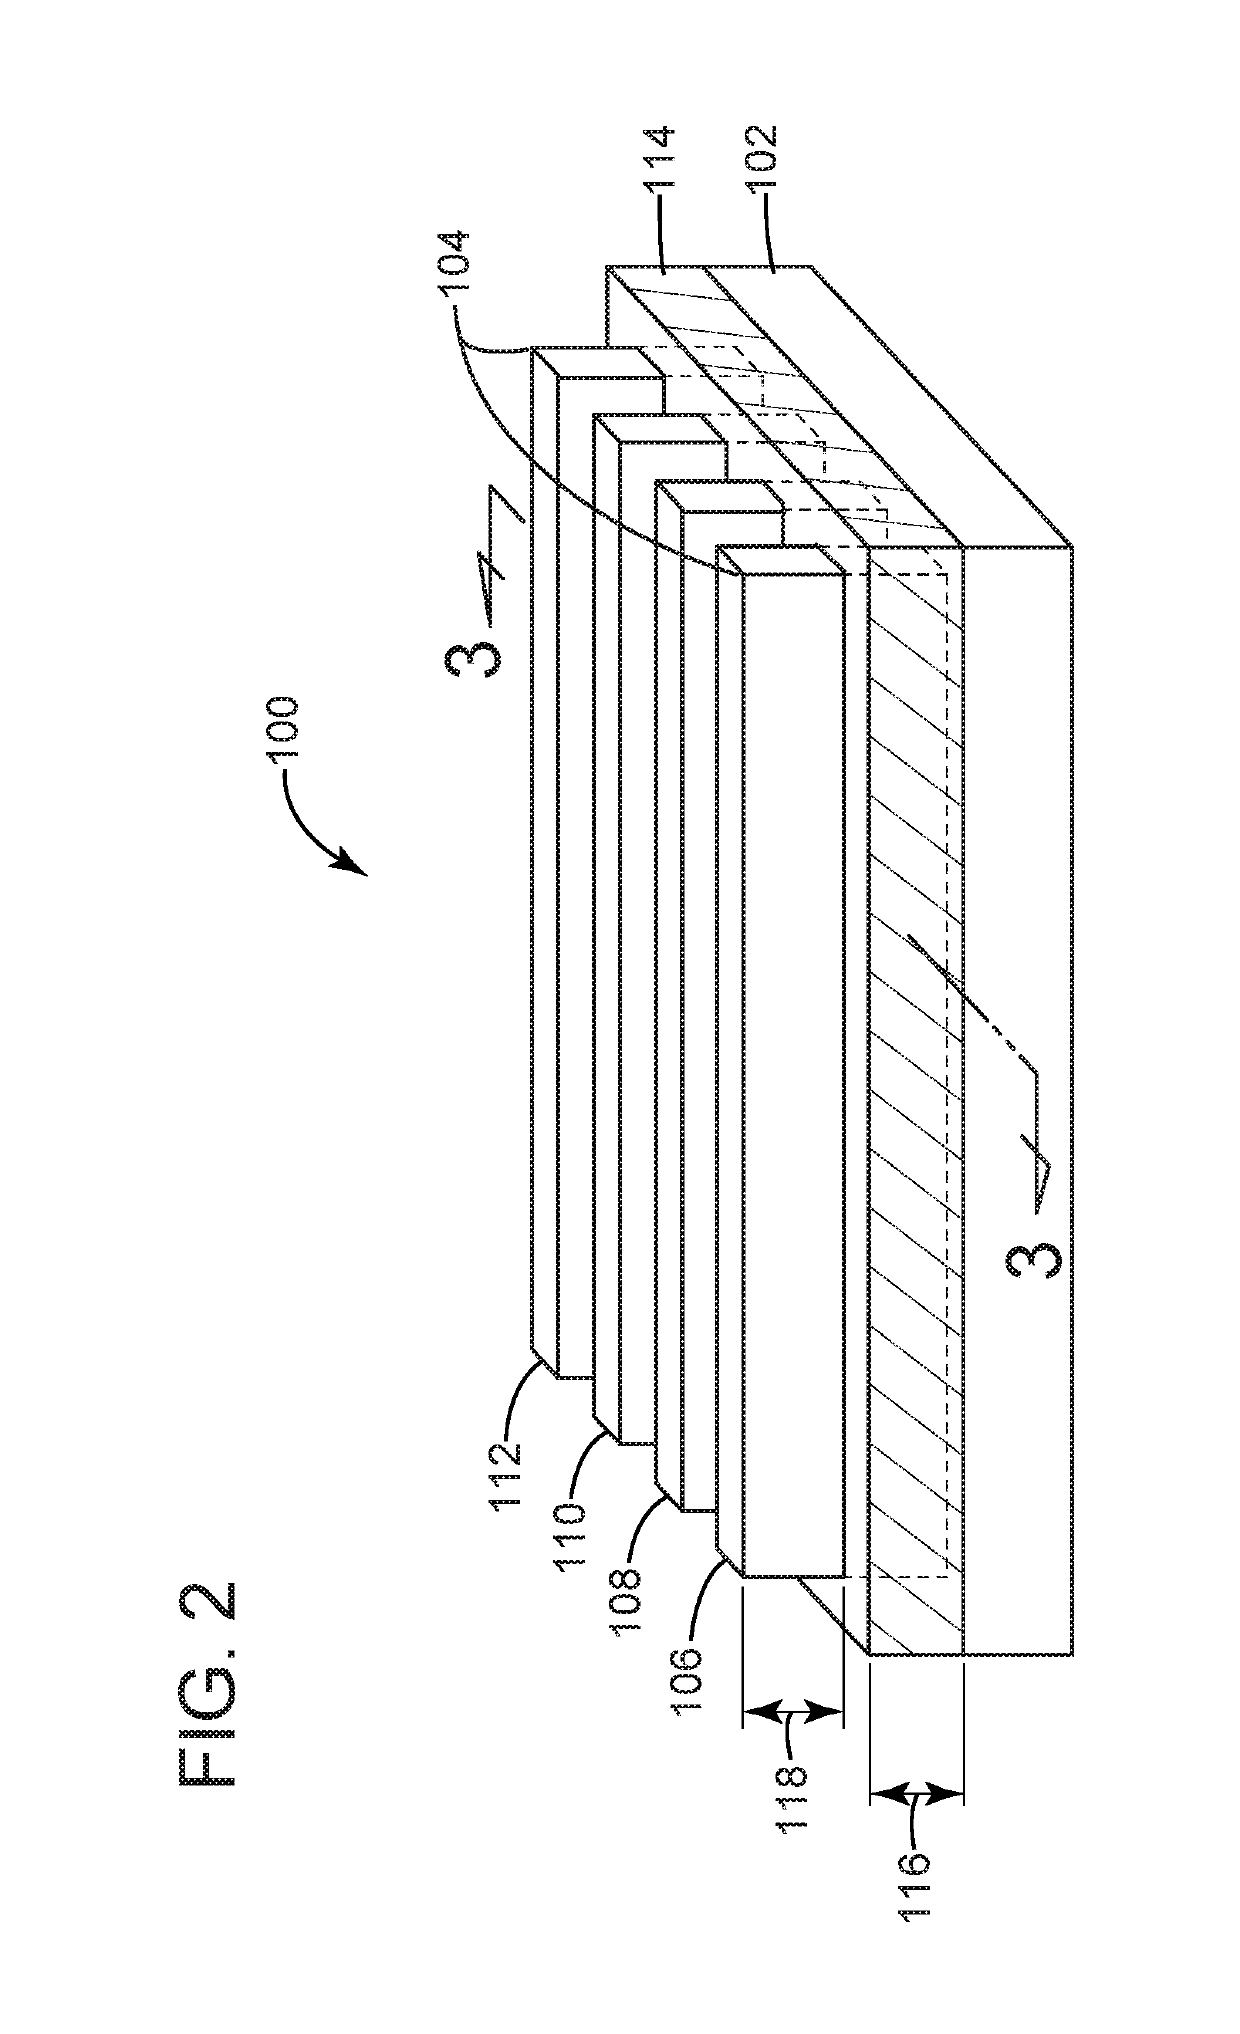 Method and apparatus for reducing threshold voltage mismatch in an integrated circuit